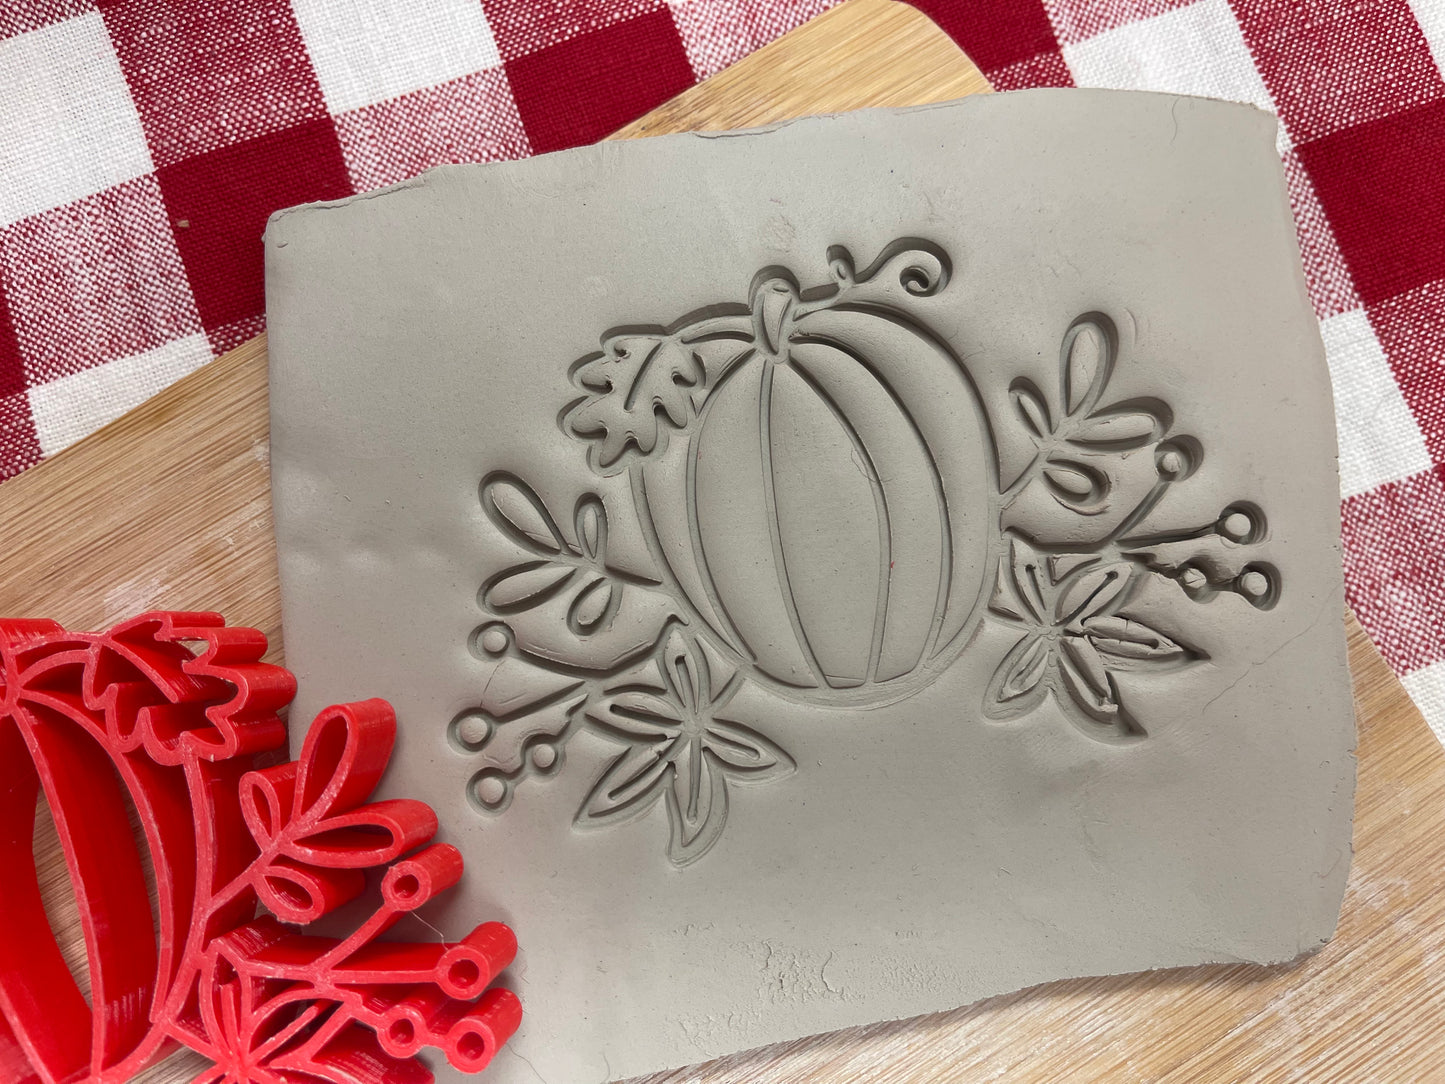 Autumn Stamp Series - Autumn Pumpkin with Vines stamp, plastic 3D printed, multiple sizes